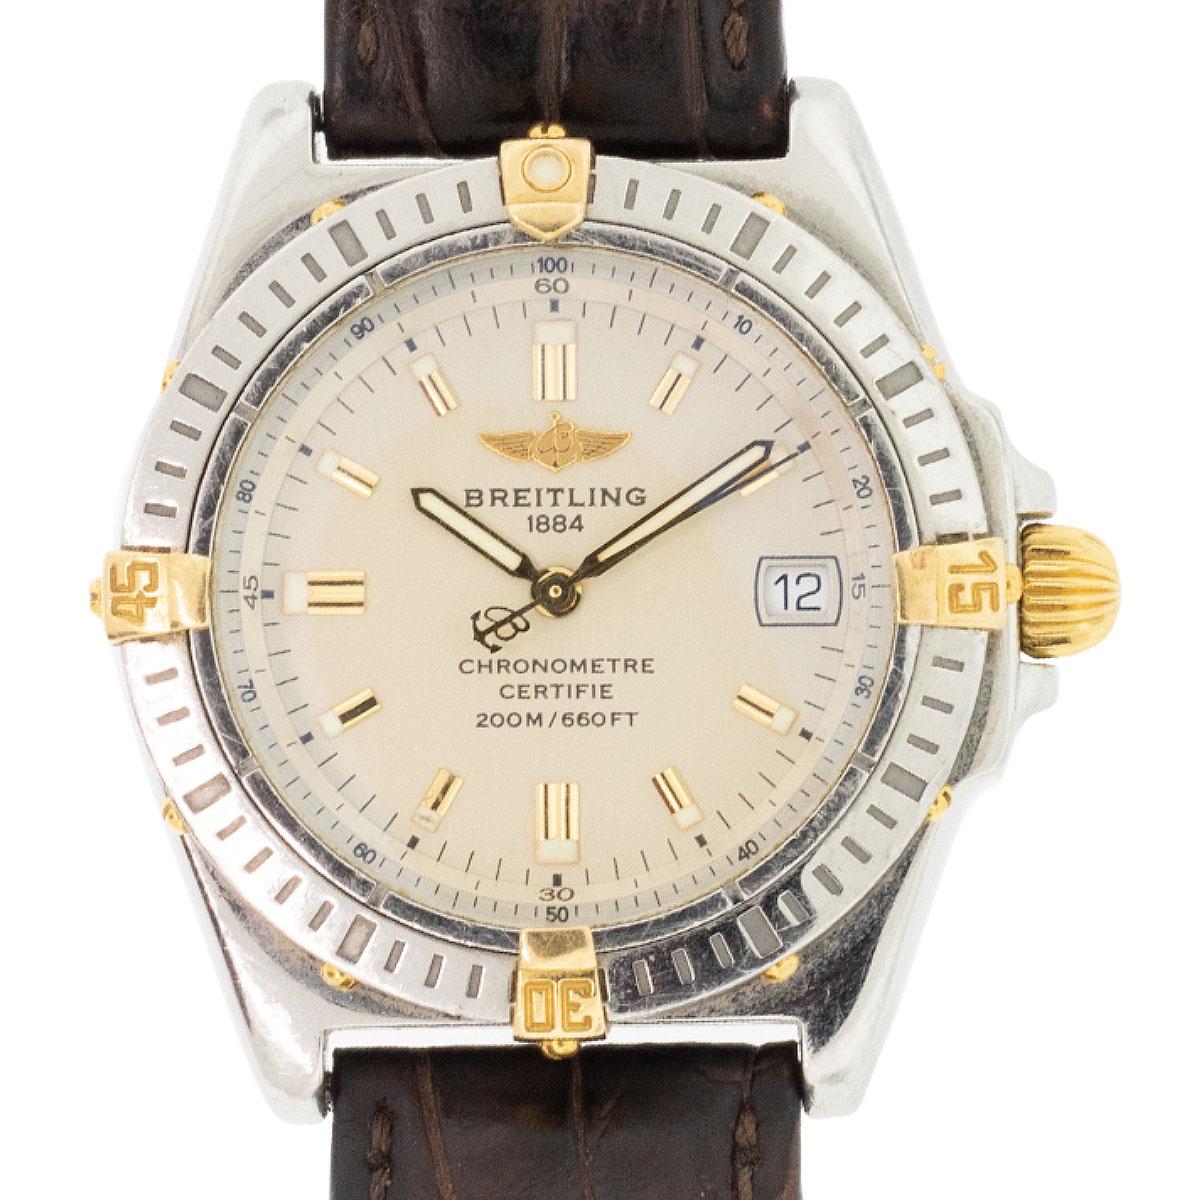 Breitling B77346 Callisto Two Tone Vintage Ladies Watch

Elegance and sophistication are embodied in the Breitling B77346 Callisto, a vintage ladies' timepiece that transcends time. With its timeless design and impeccable craftsmanship, this watch